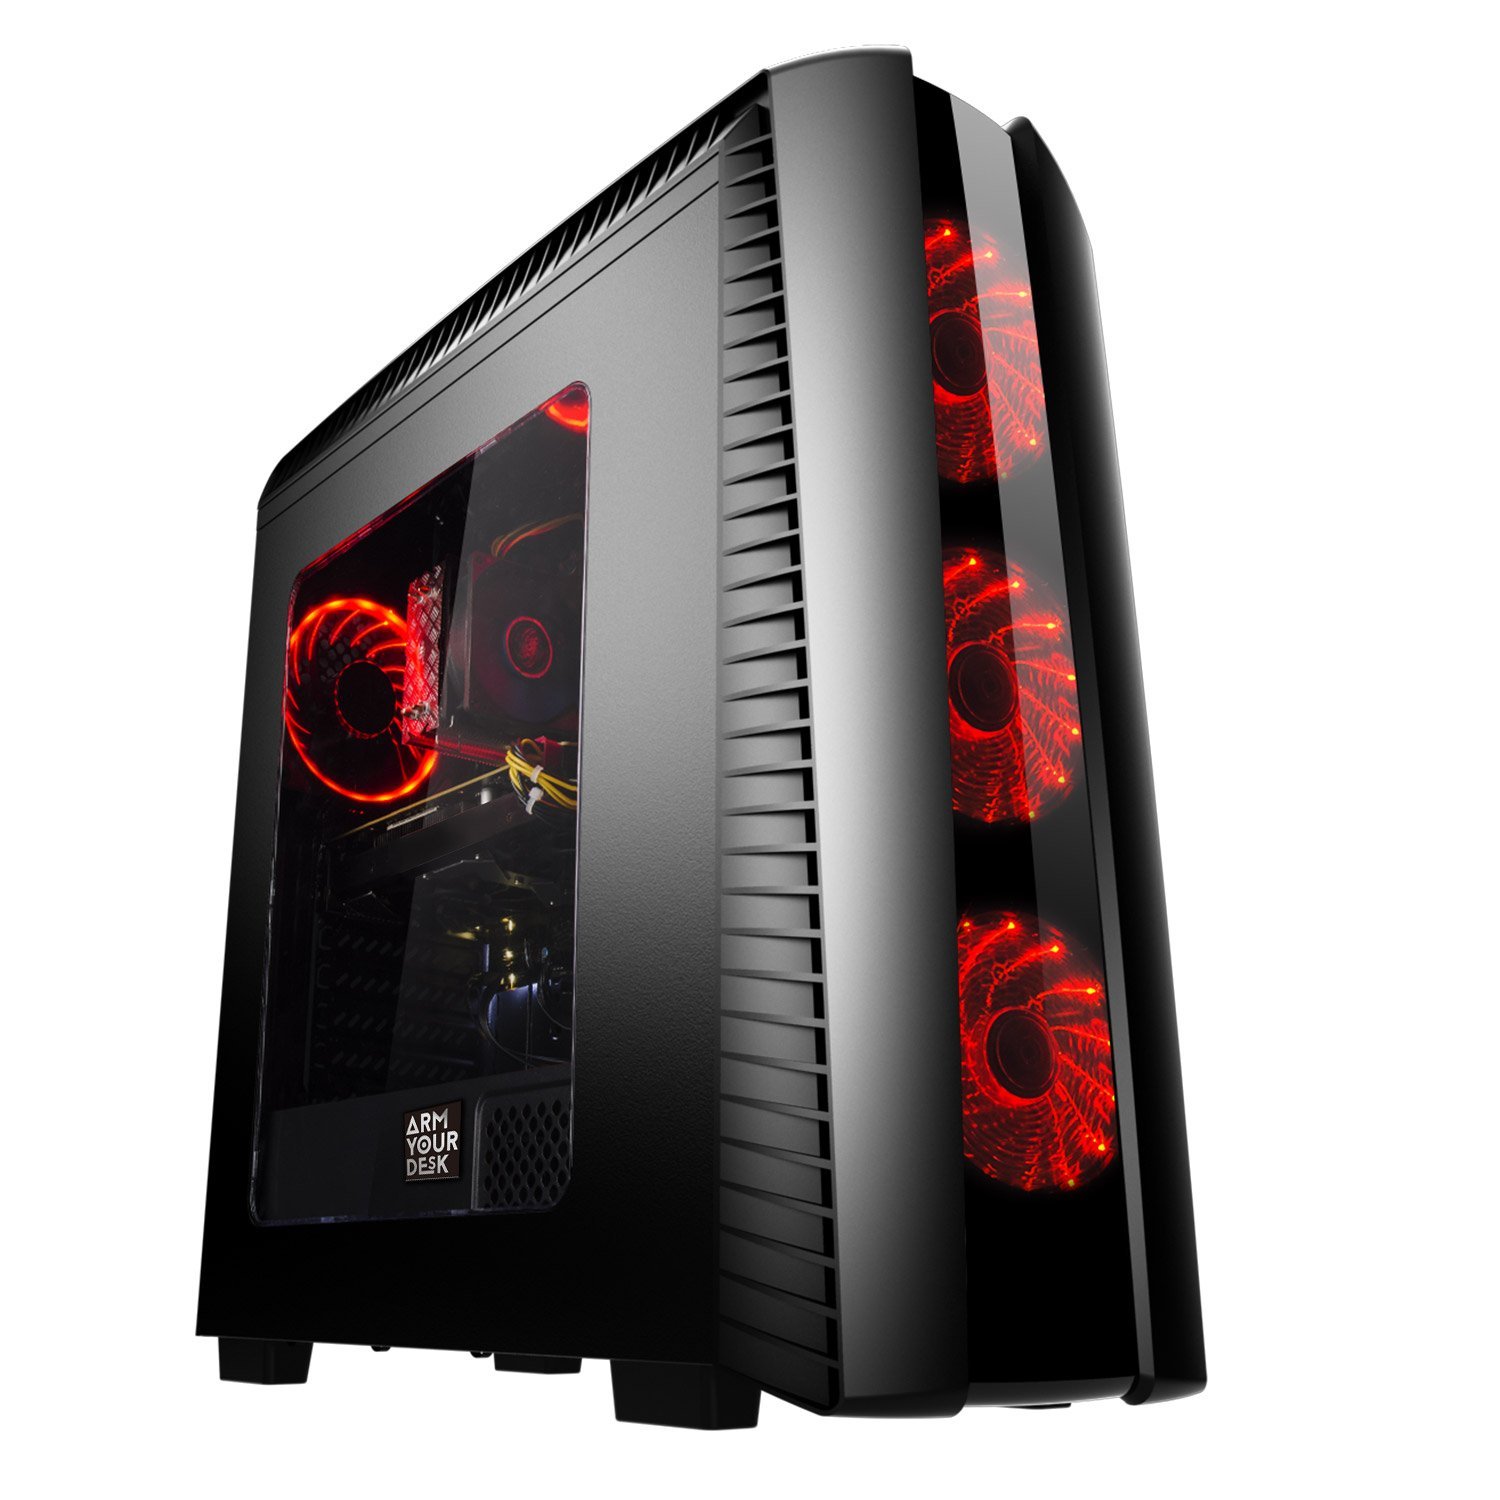 ArmYourDesk G58 Gaming PC